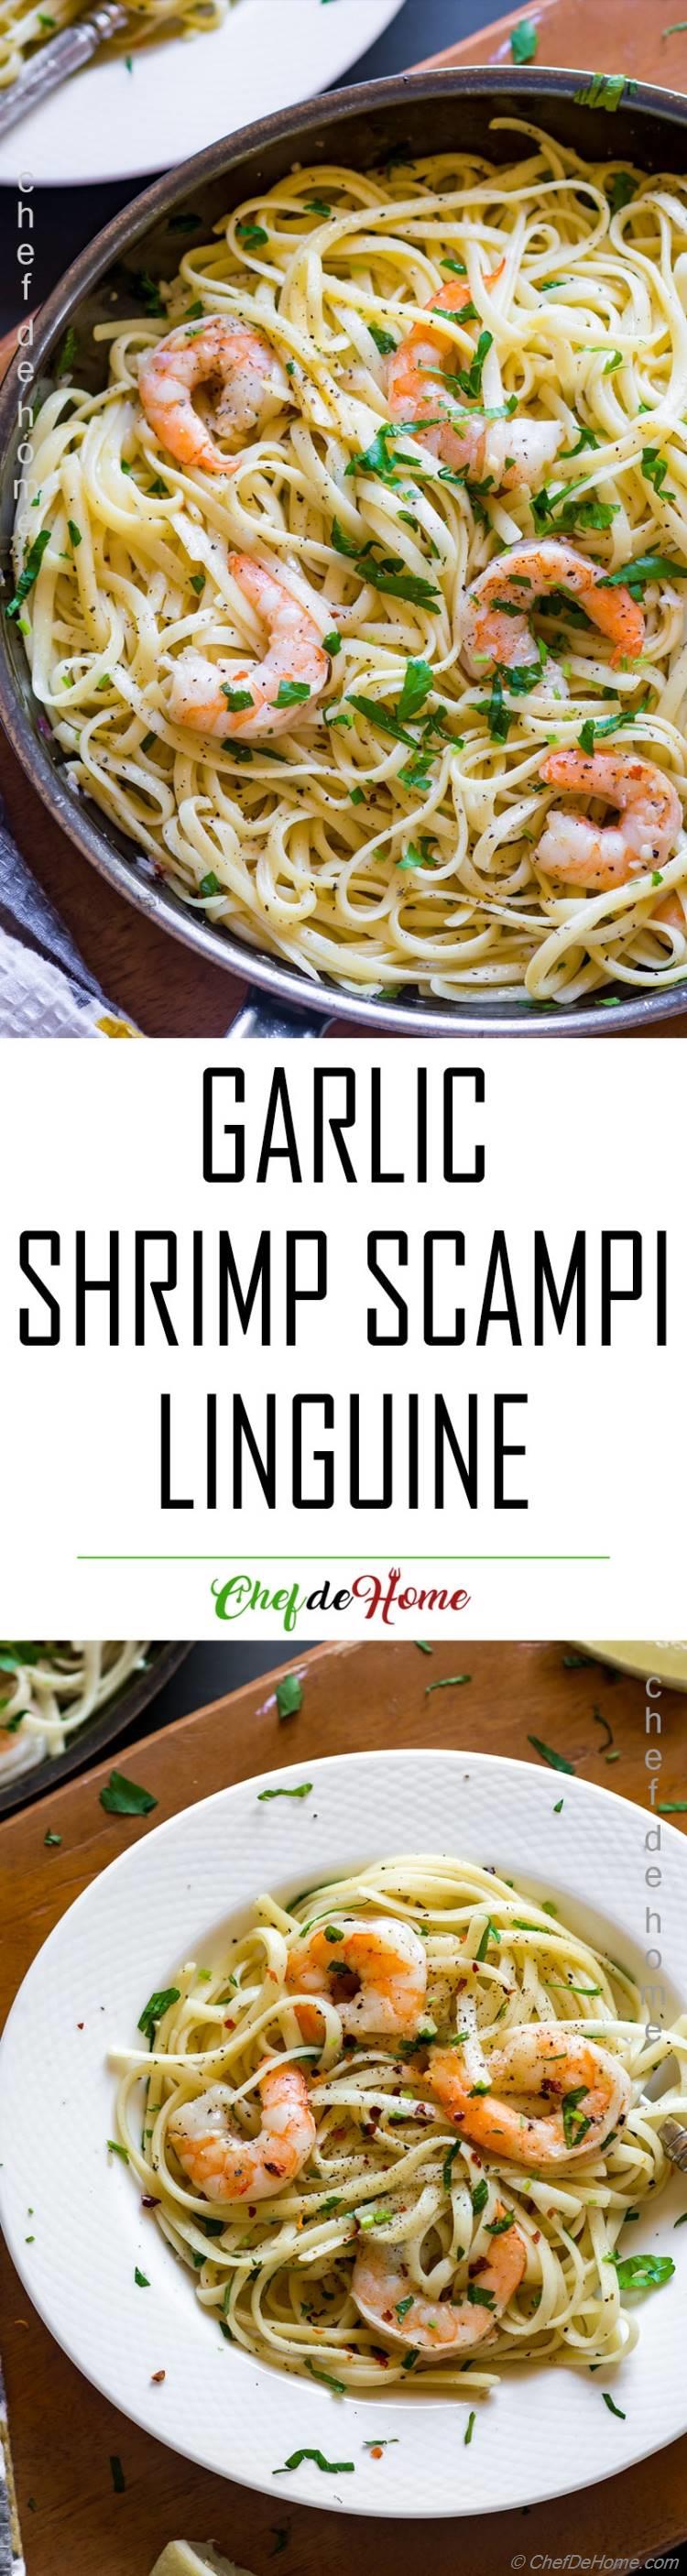 Easy Garlic and Wine Sauce Shrimp Scampi with Pasta